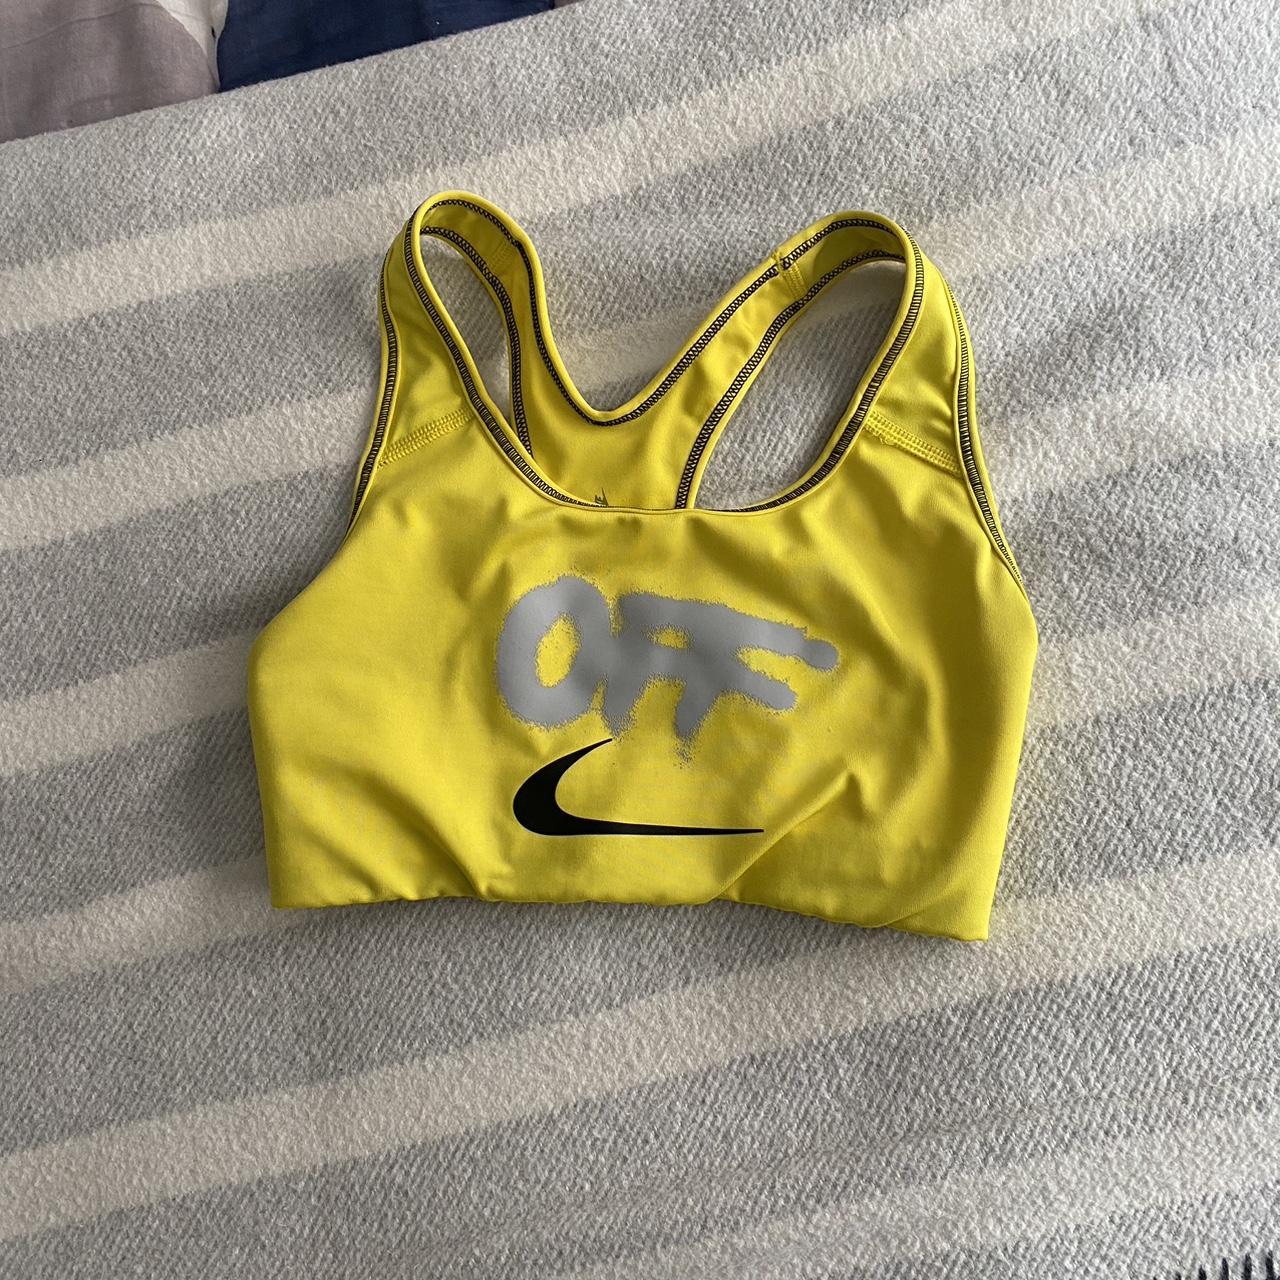 Off White x Nike collab sports bra. size xs. in - Depop